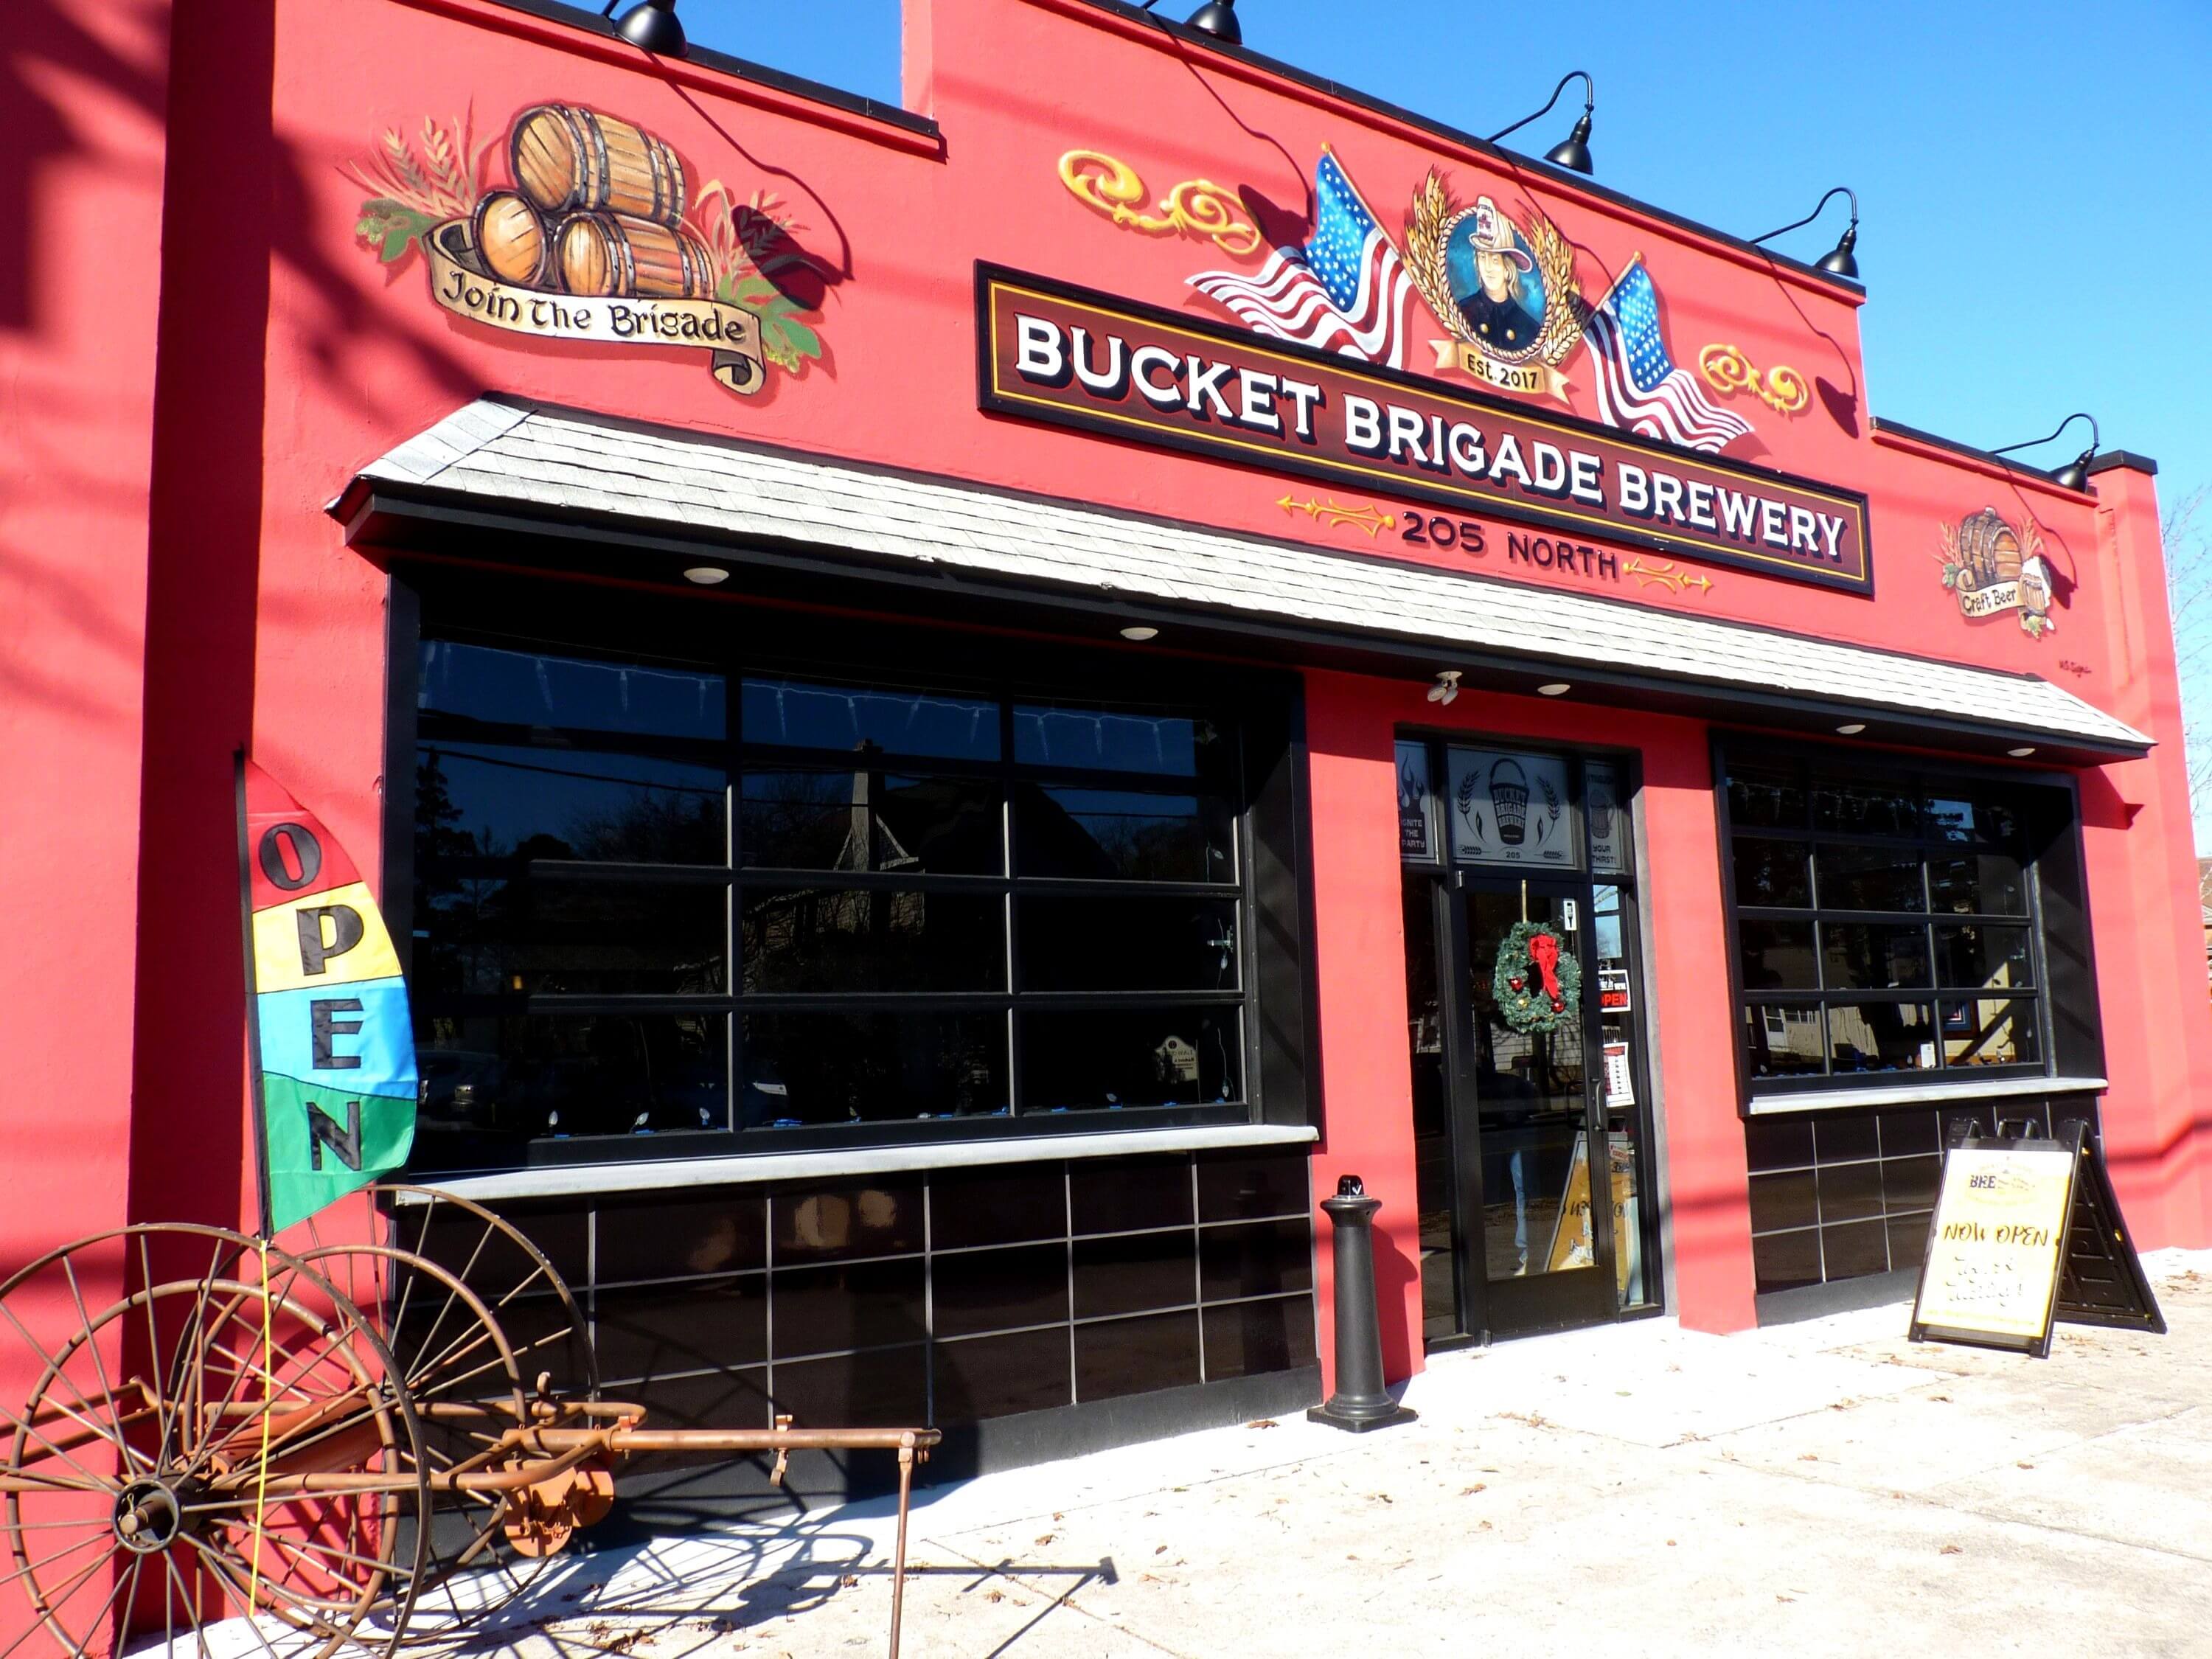 Extinguish Your Thirst at the New Bucket Brigade Brewery